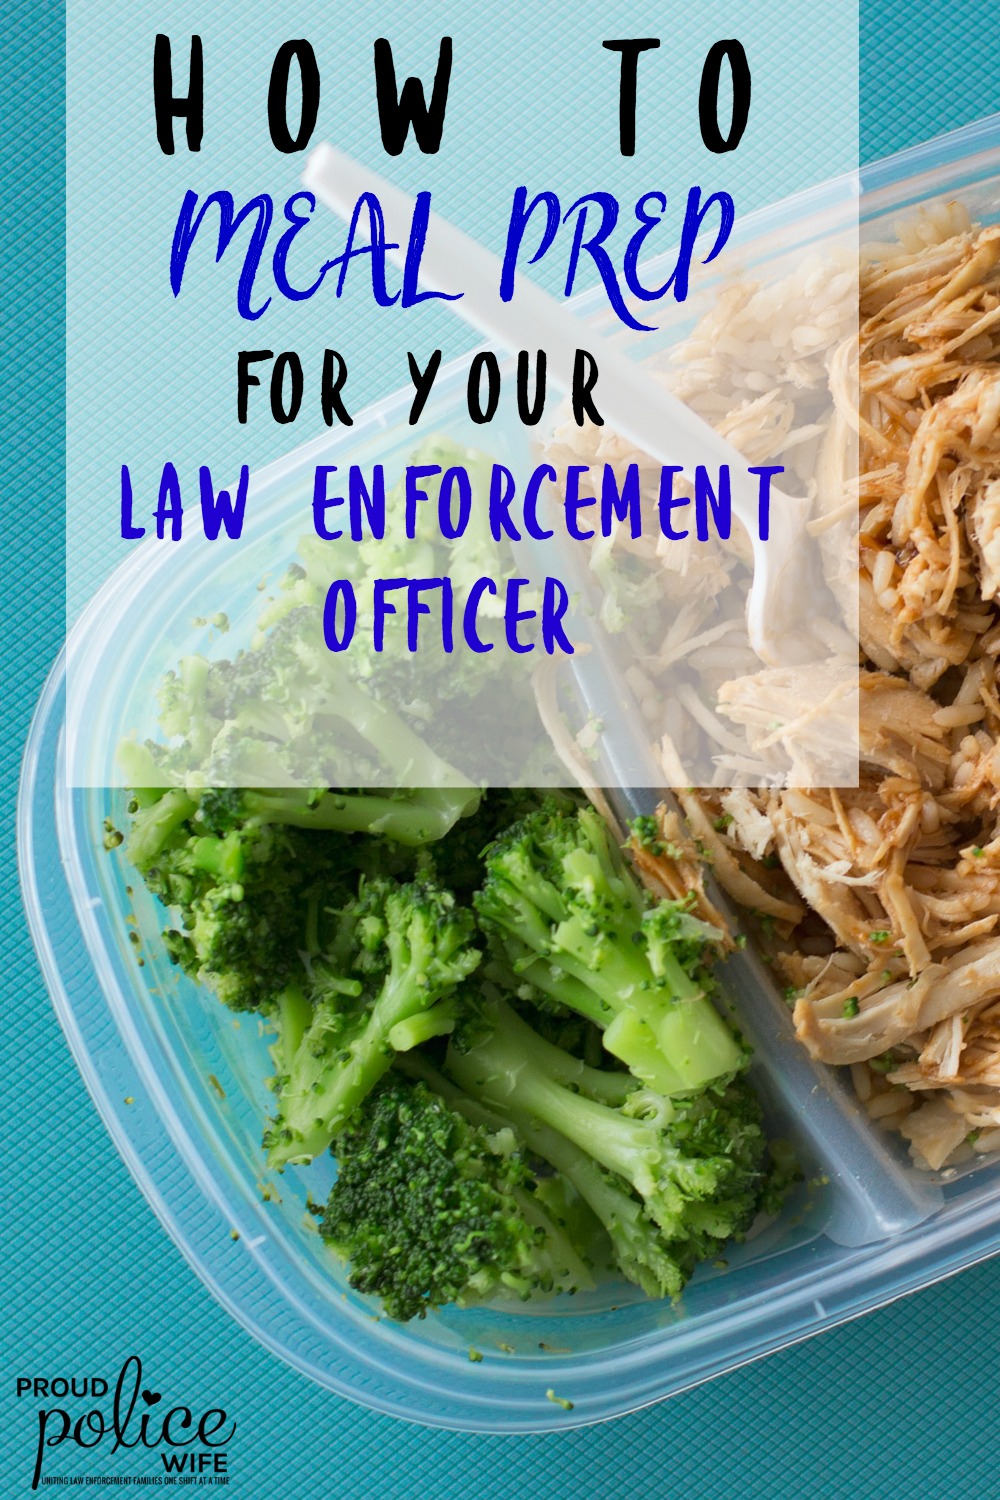 HOW TO MEAL PREP FOR YOUR LAW ENFORCEMENT OFFICER | #proudpolicewife |#policewife |#policewifelife |#mealplanning |#mealprep |#lawenforcementofficer